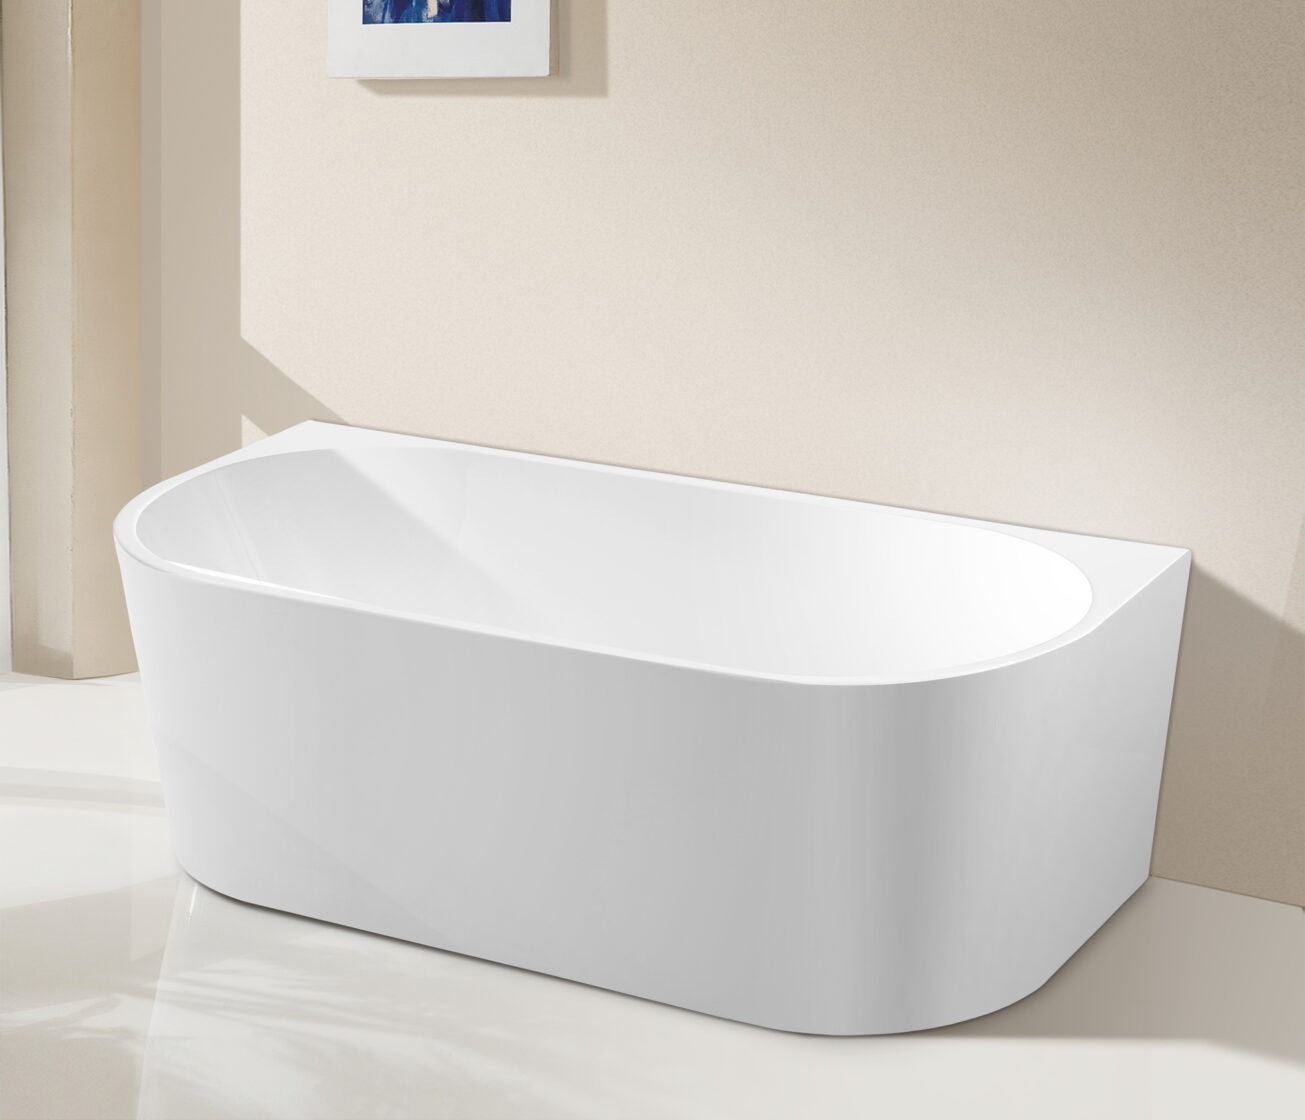 RIVA DANA BACK TO WALL BATHTUB GLOSS WHITE (AVAILABLE IN 1500MM AND 1600MM